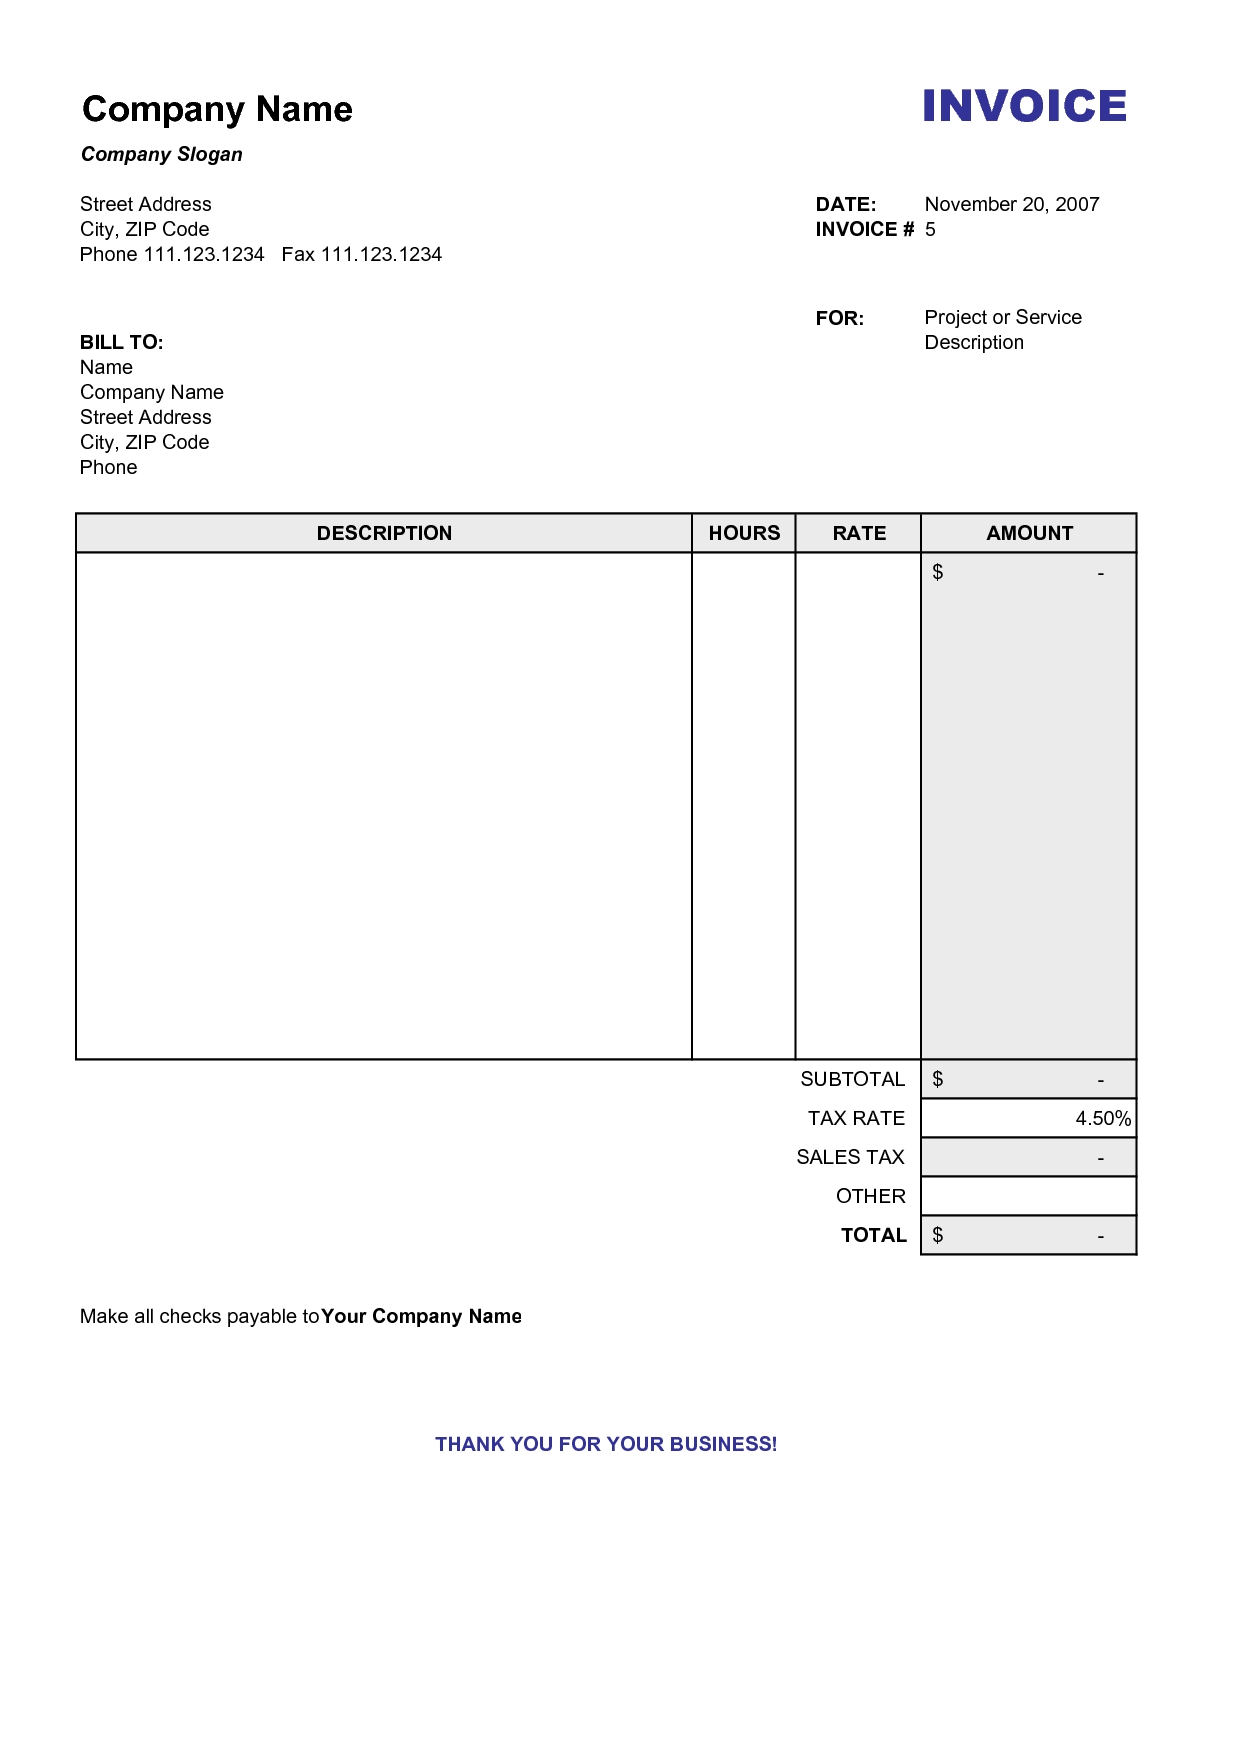 free blank invoice template 10 samples blank invoice templates free and mistakes in business 1240 X 1754